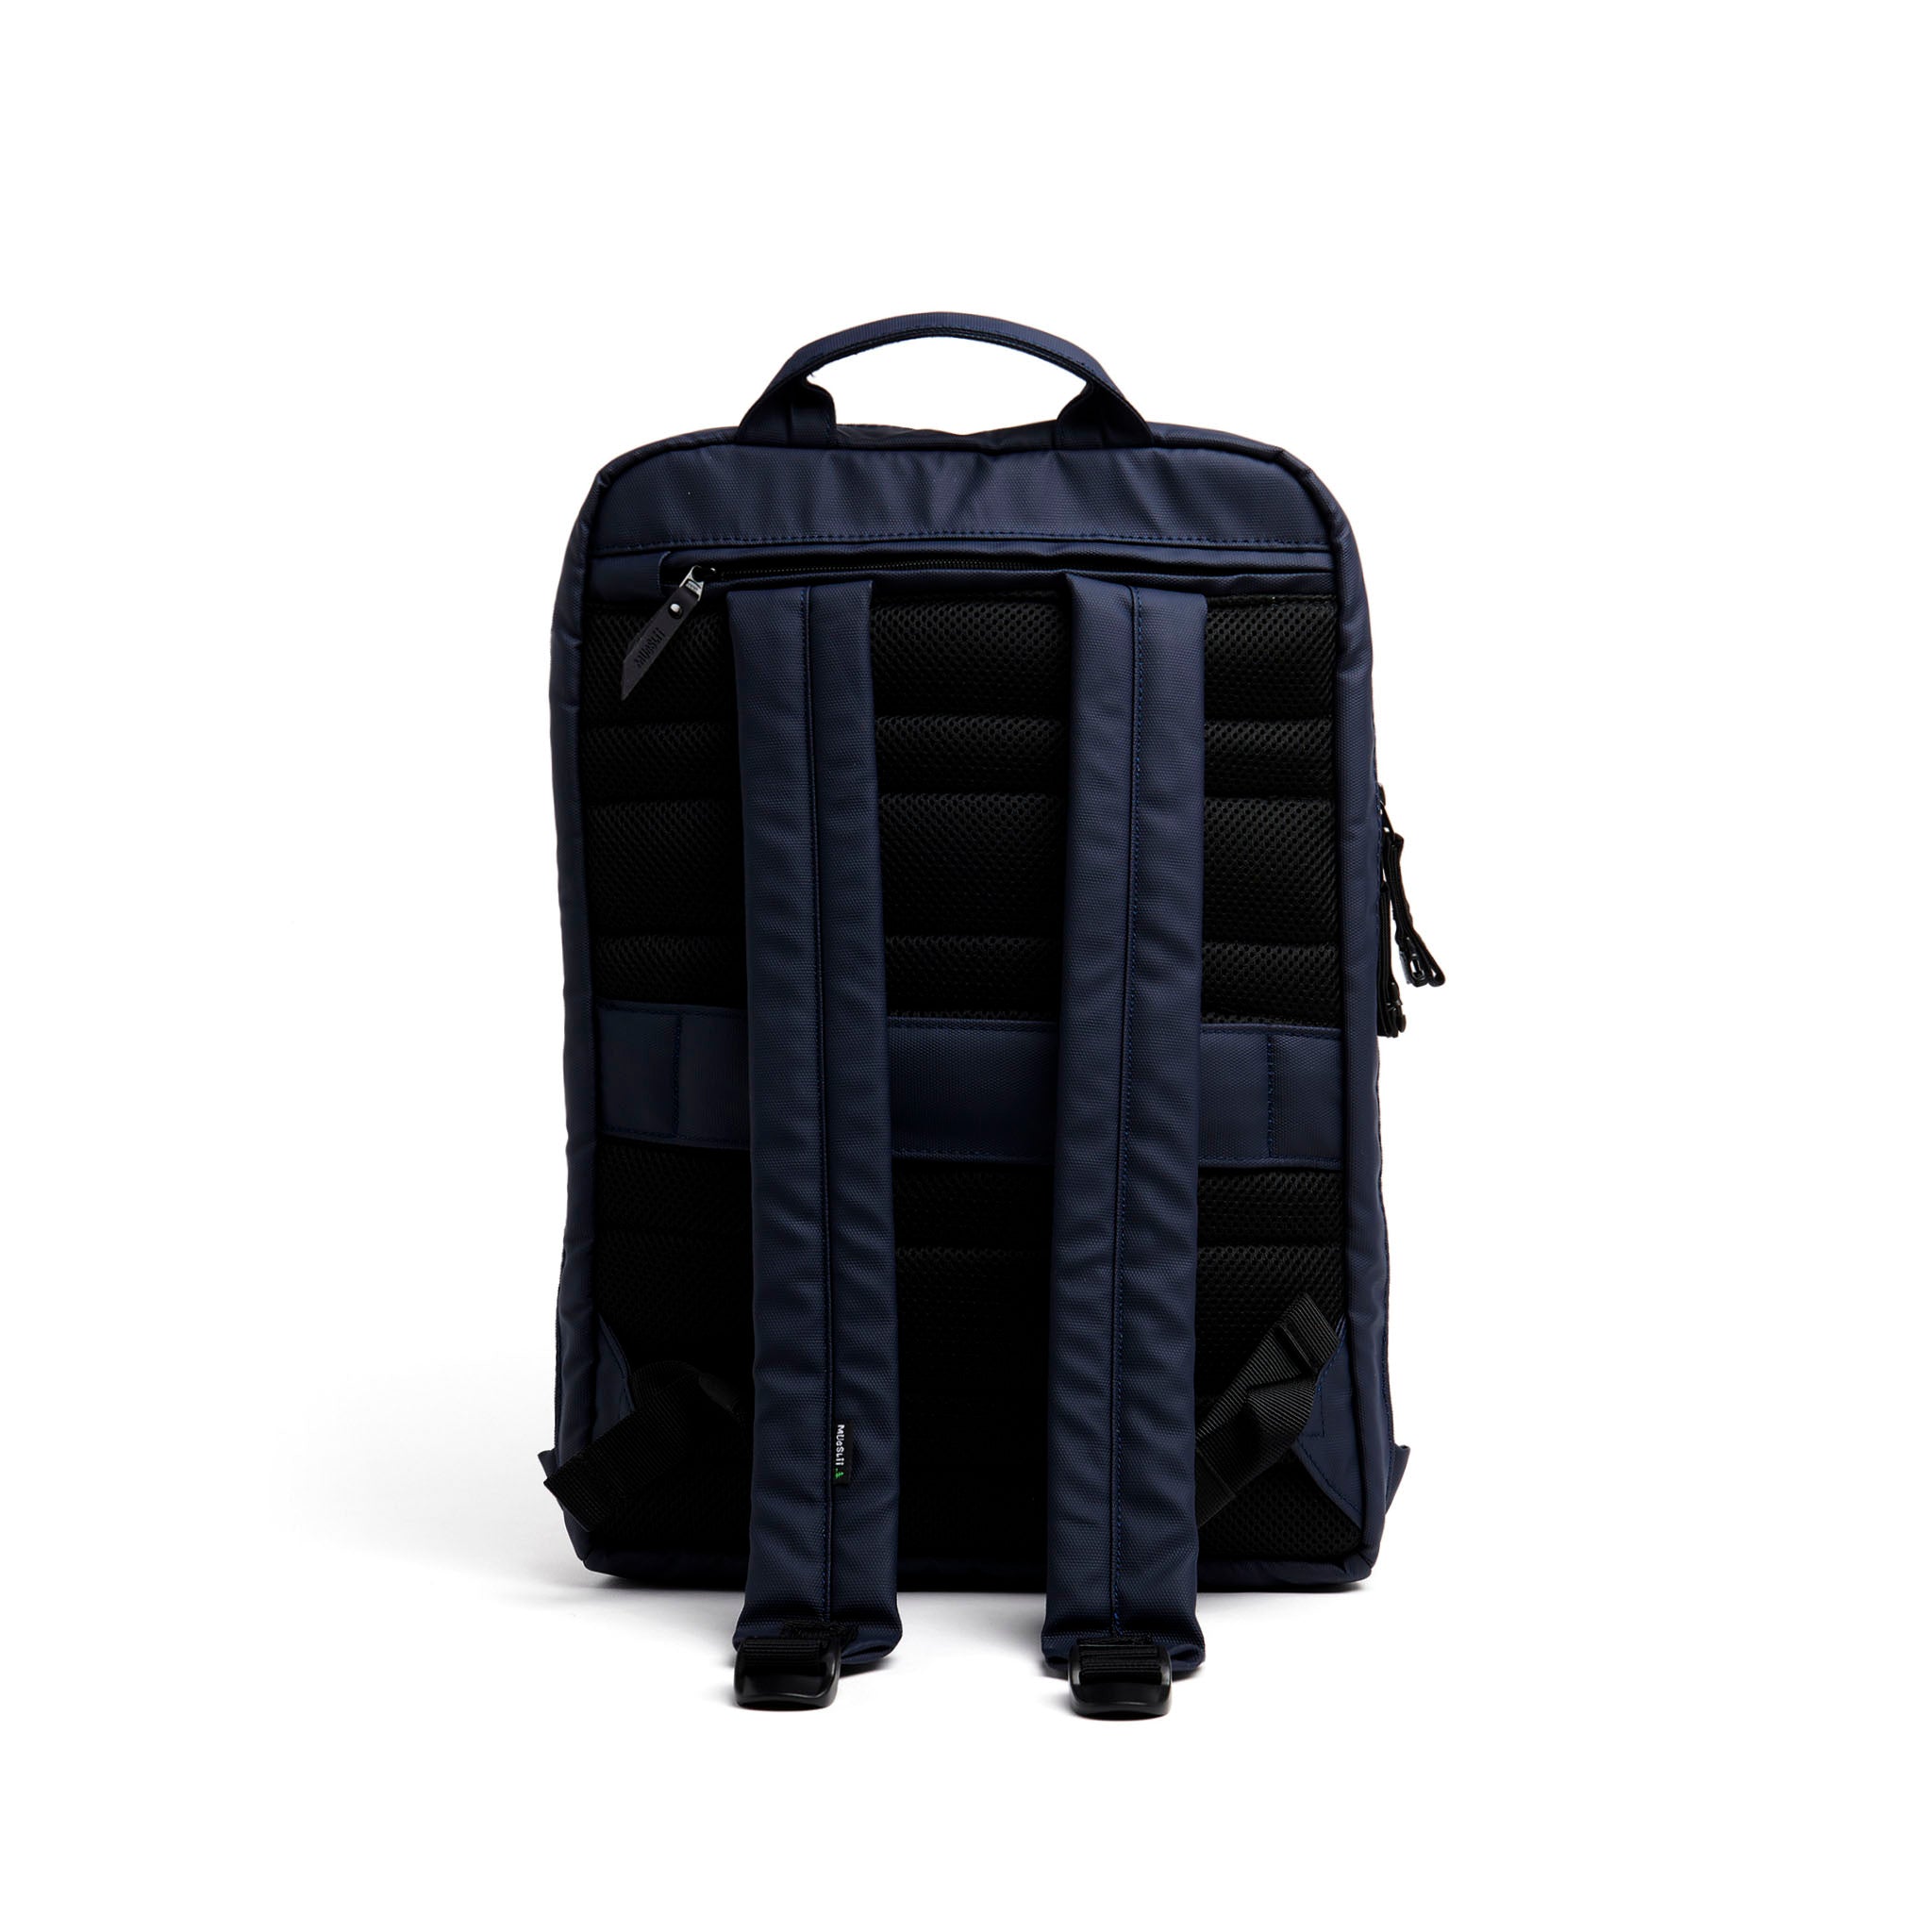 Mueslii daily backpack, made of PU coated waterproof nylon, with a laptop compartment, color blue, back vview.